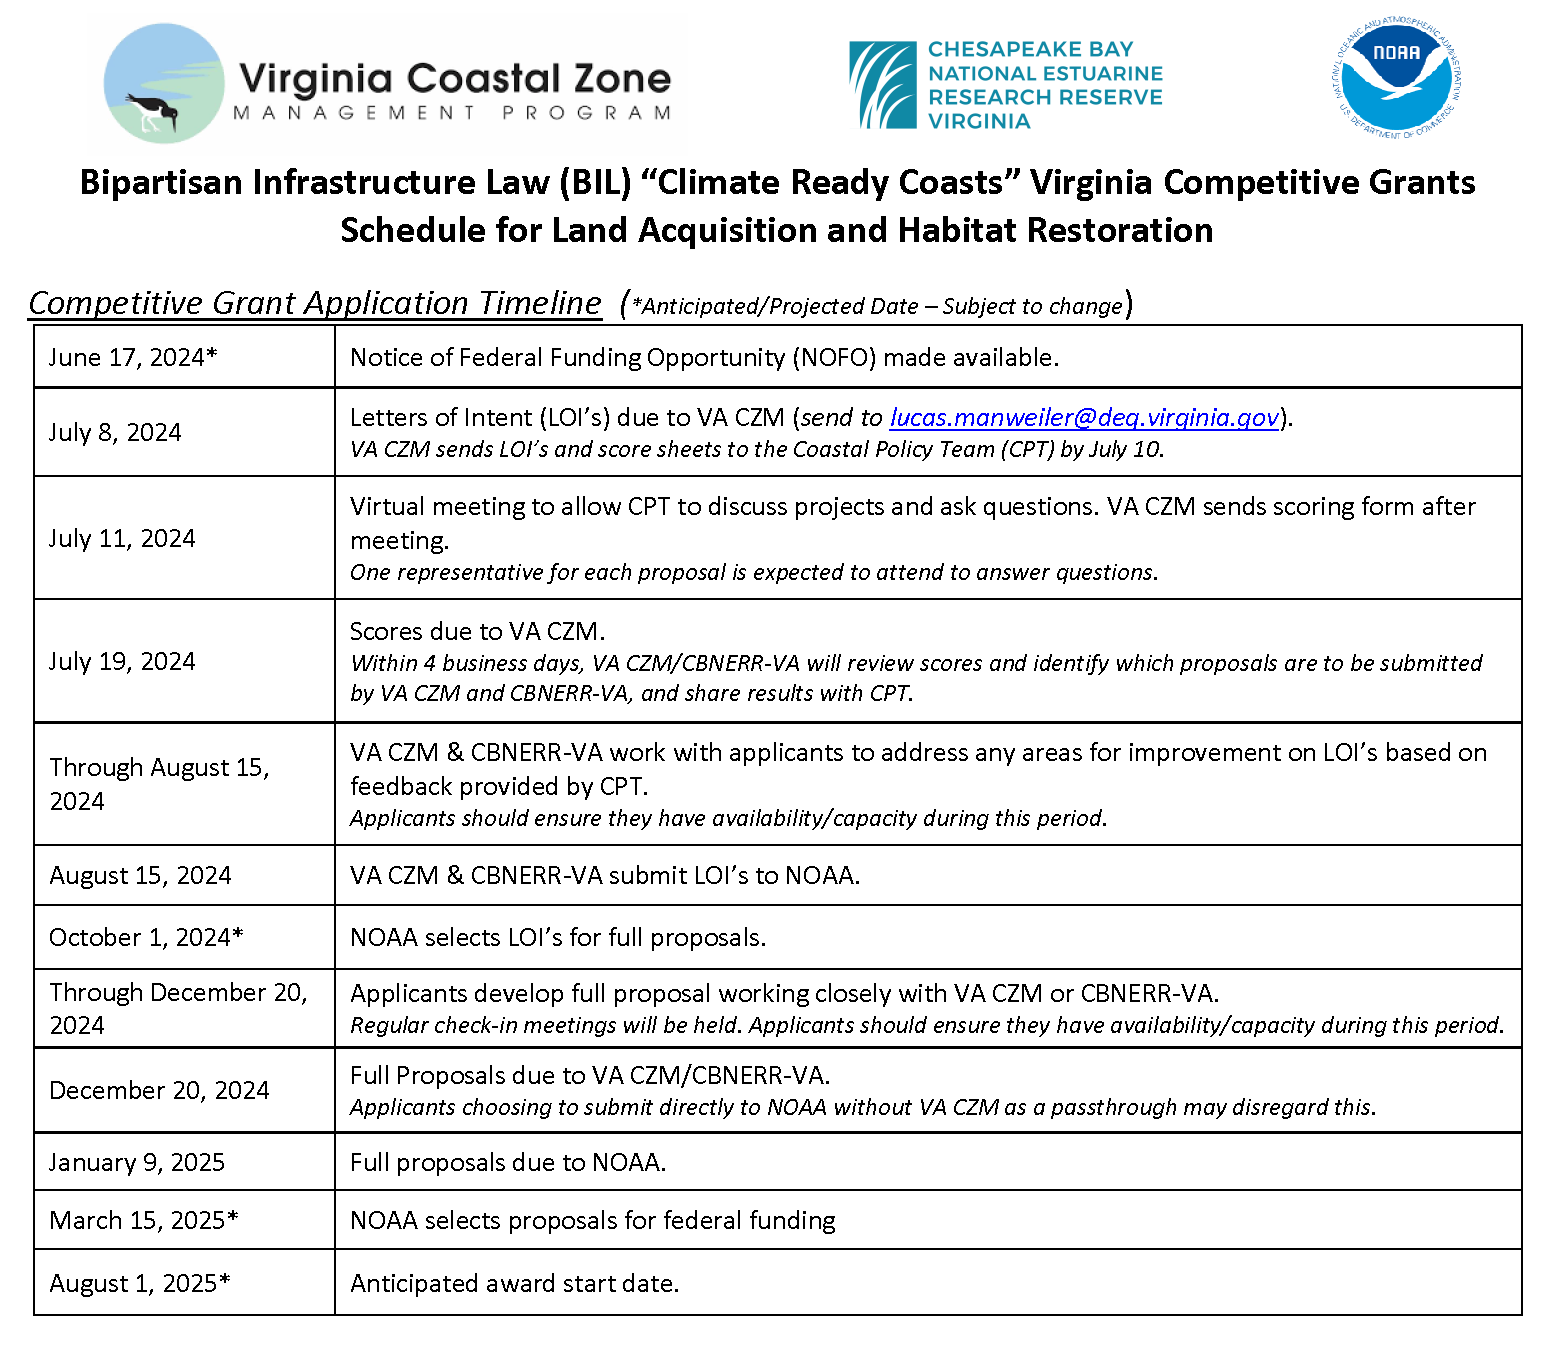 Competitive Grant Application Timeline